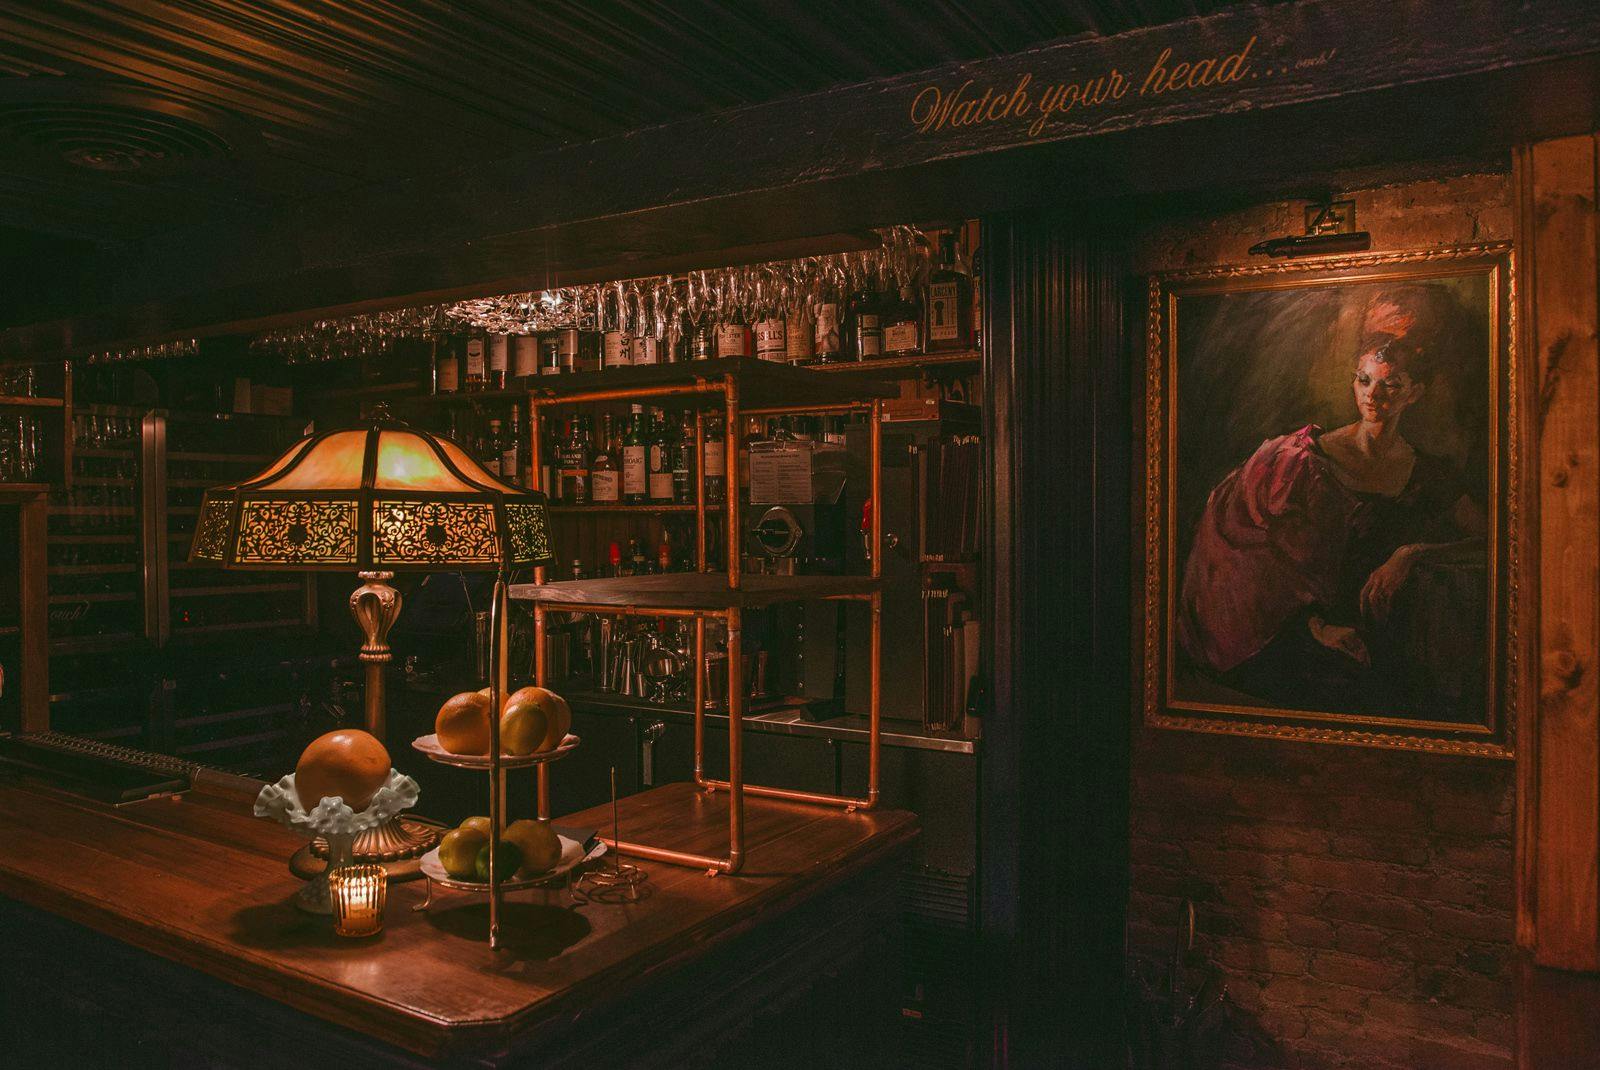 An atmospheric photograph of a cozy, dimly-lit bar interior evoking a vintage feel. Dominated by warm, muted lighting, a classic stained-glass lamp casts a soft glow on the polished wooden counter, which is adorned with a tiered stand holding fresh citrus fruits. Assorted bottles and glassware gleam subtly on the shelves in the background. The scene is complemented by a framed oil painting of a contemplative individual, adding to the rich, historical ambiance. Above the bar, the phrase 'Watch your head' is playfully inscribed, cautioning patrons of the low overhead beam.